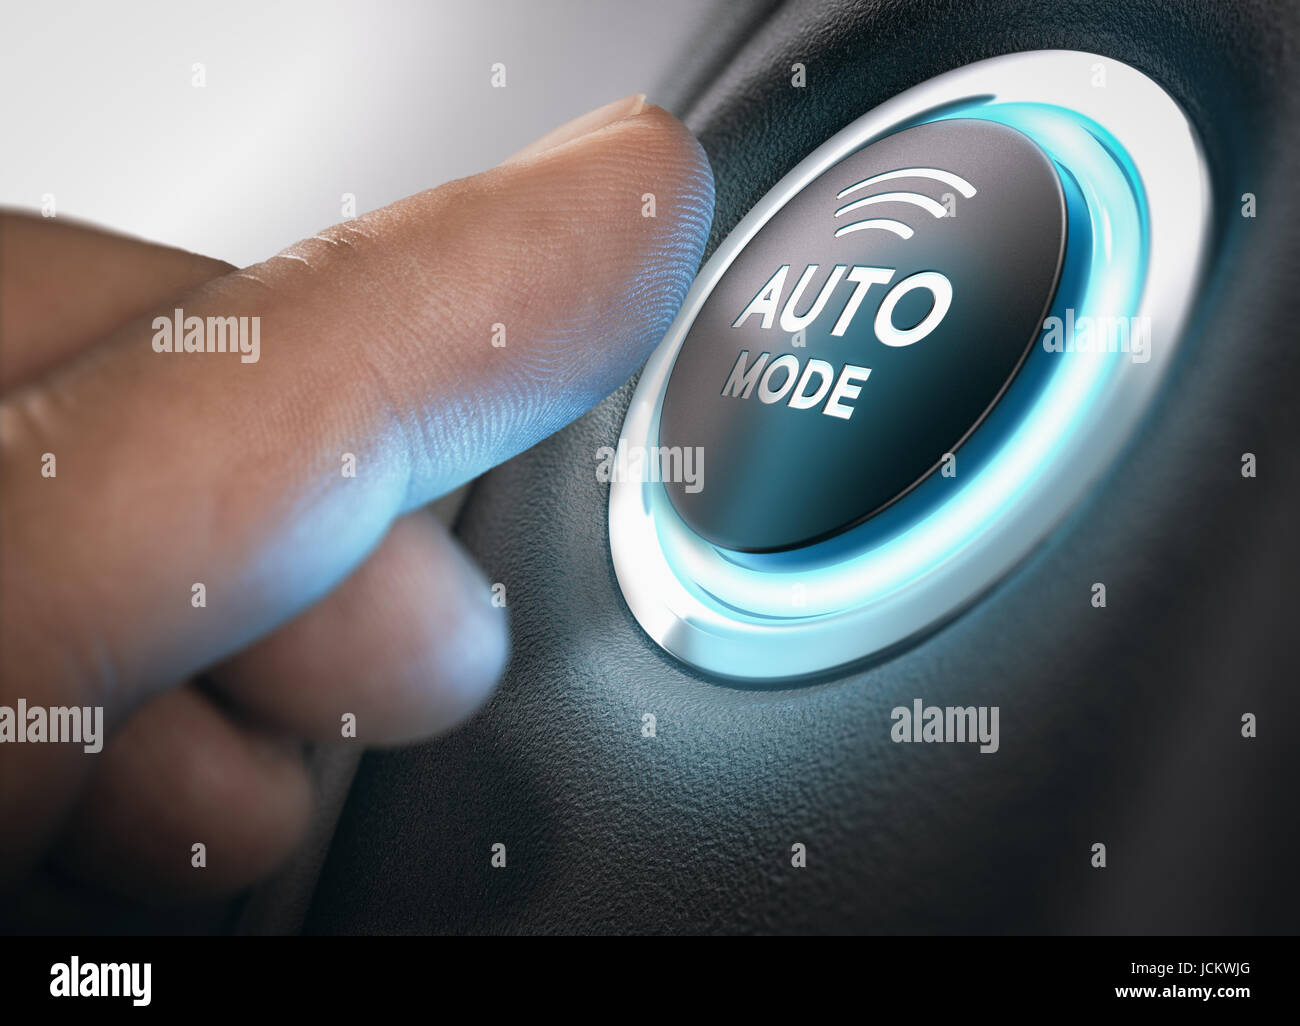 Finger about to activate automatic mode by pressing a push button. Composite image between a hand photography and a 3D background. Stock Photo